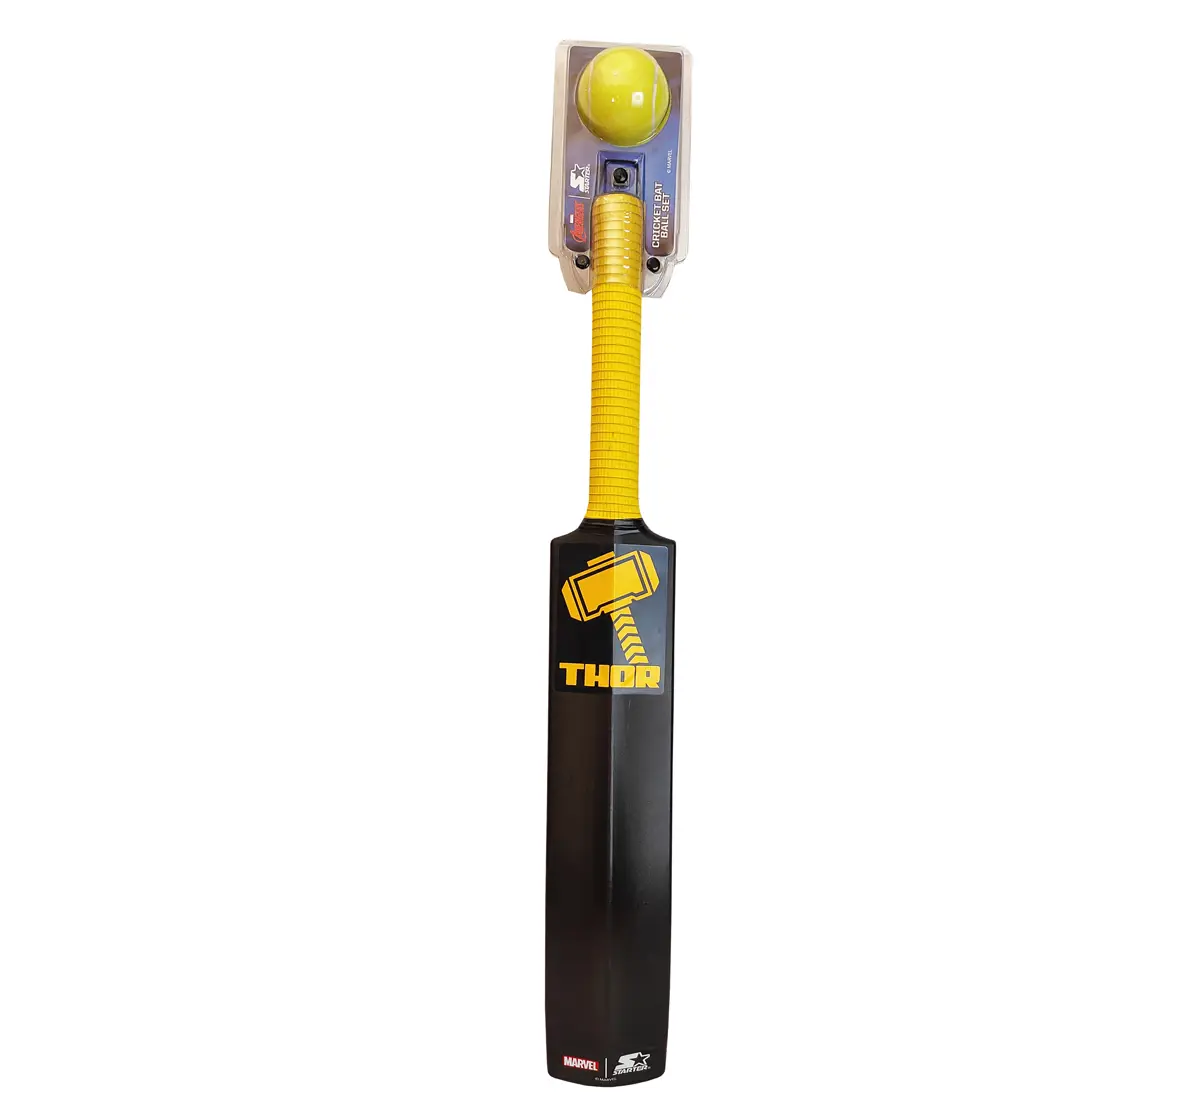 Starter Thor Cricket Bat And Ball Set Size 4 Multicolour, 3Y+